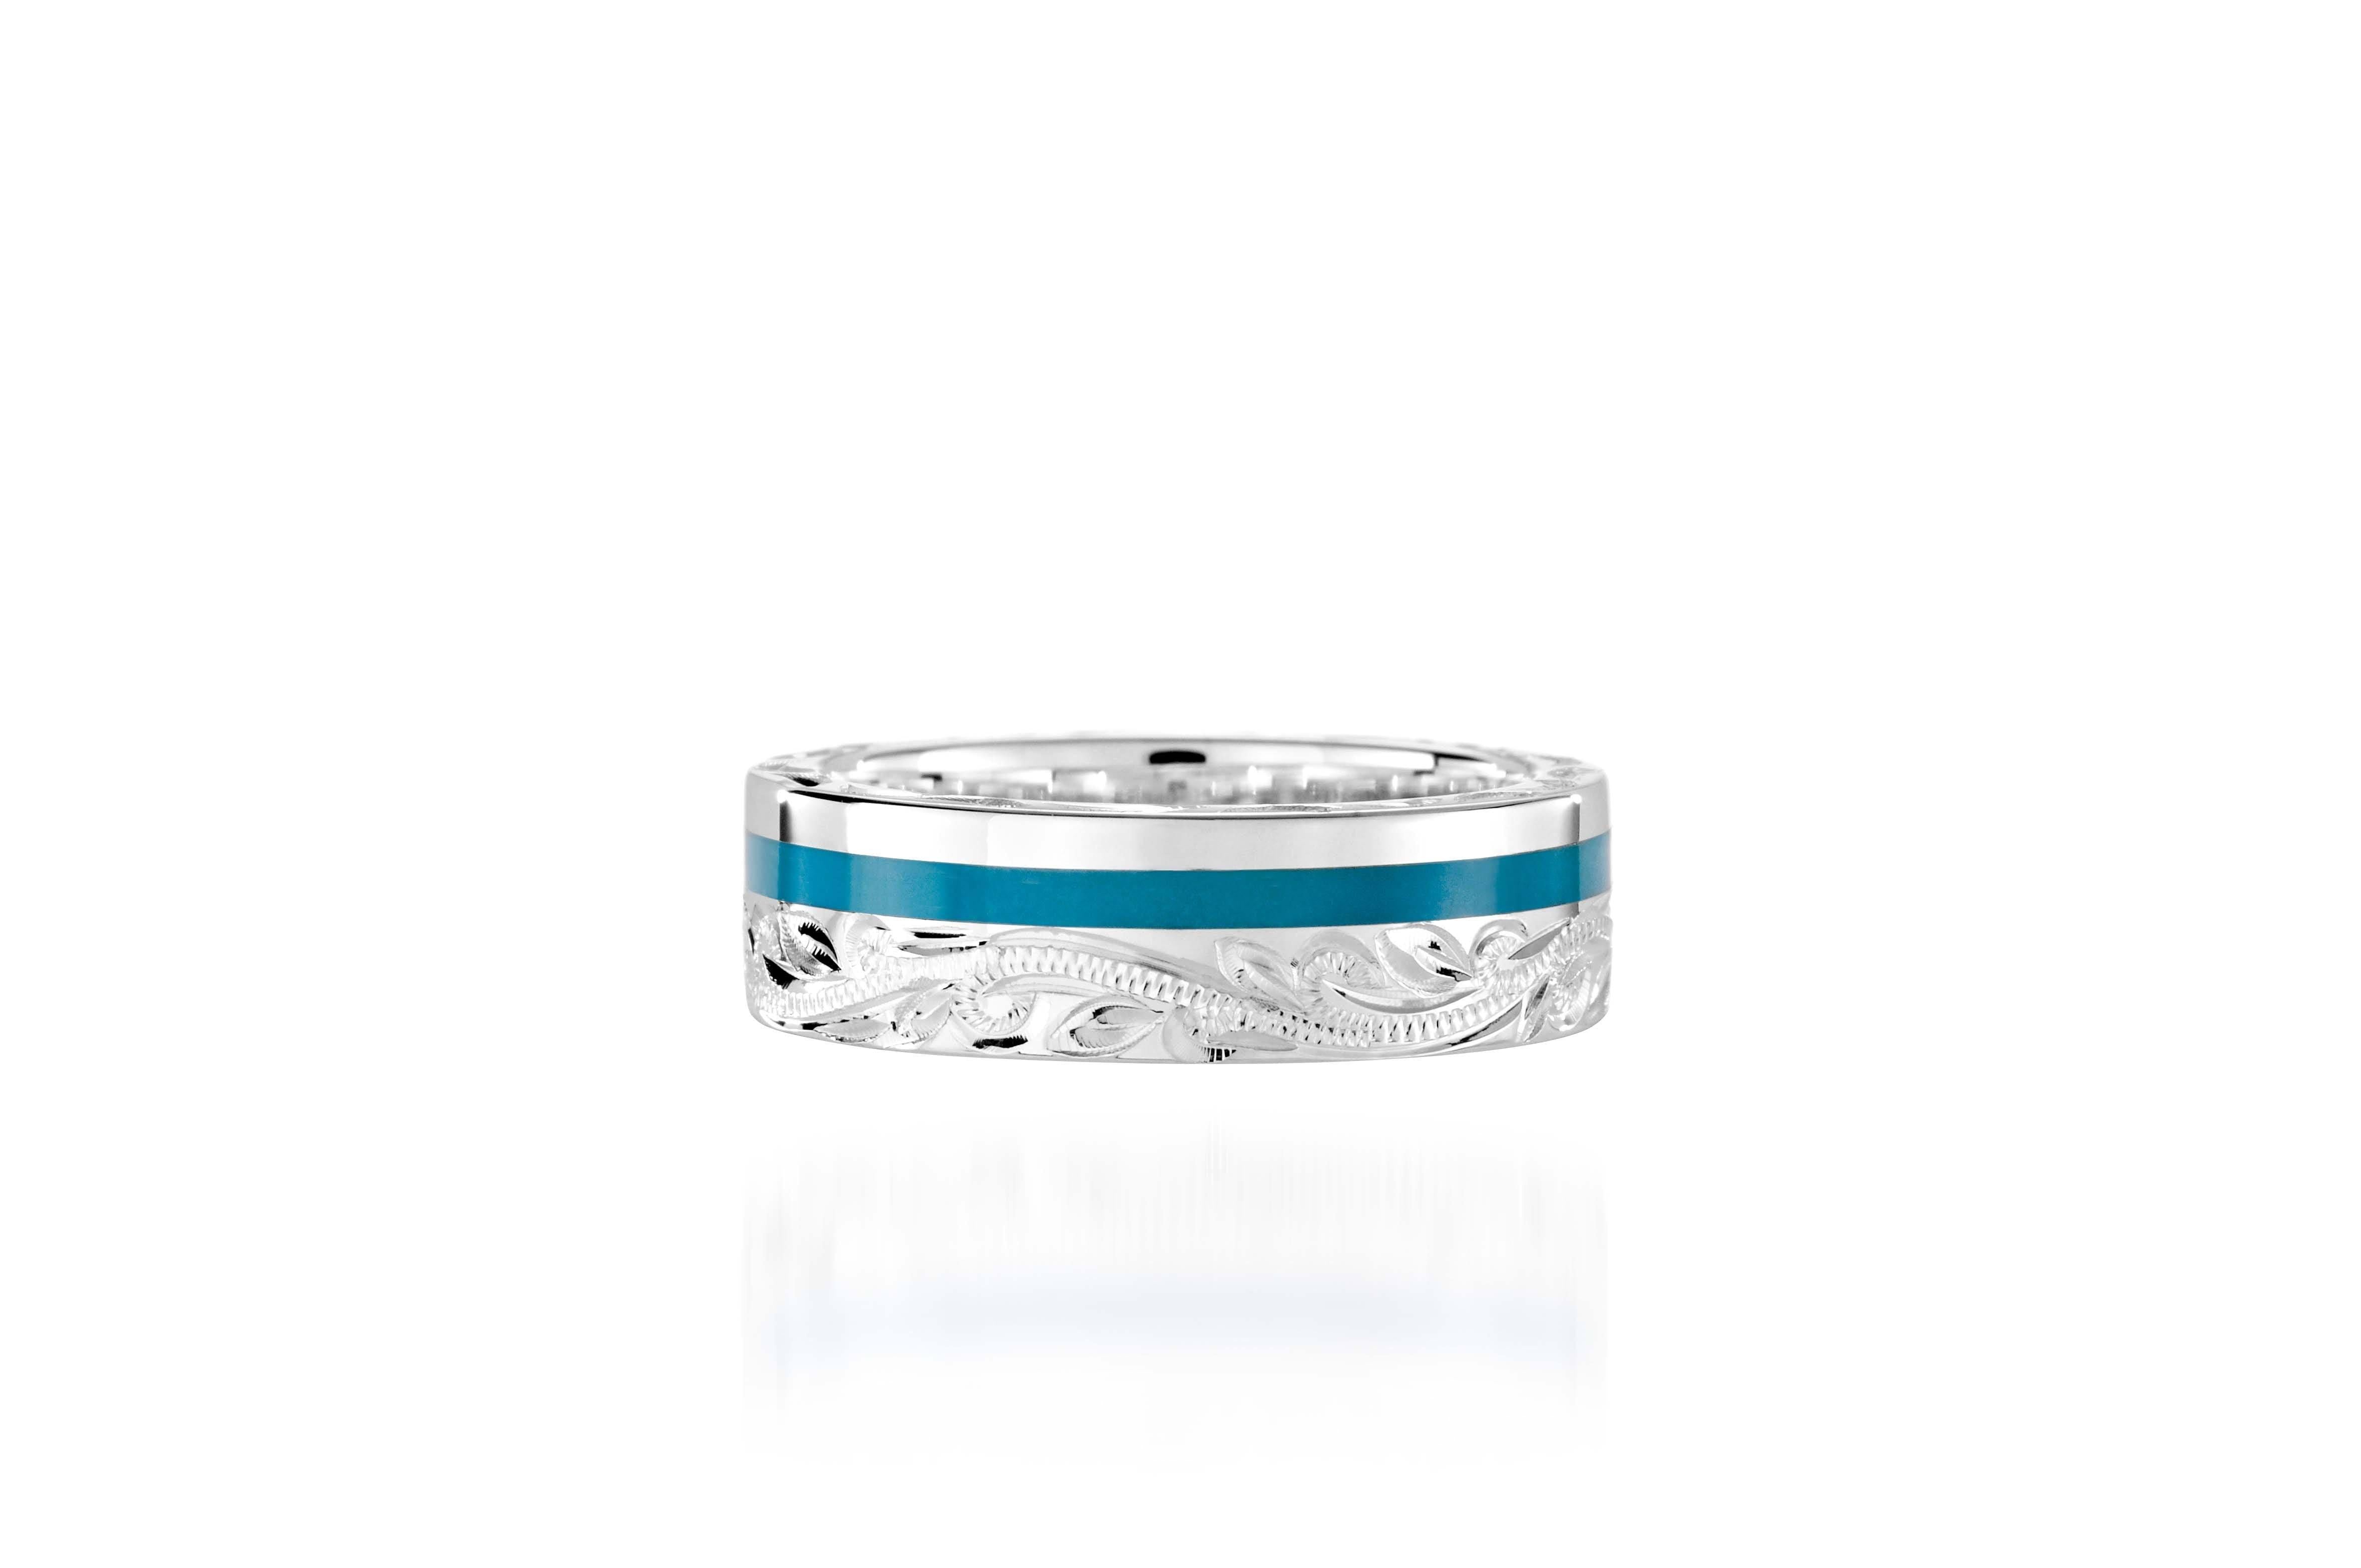 The picture shows a 925 sterling silver and turquoise wave channel ring with hand engravings.